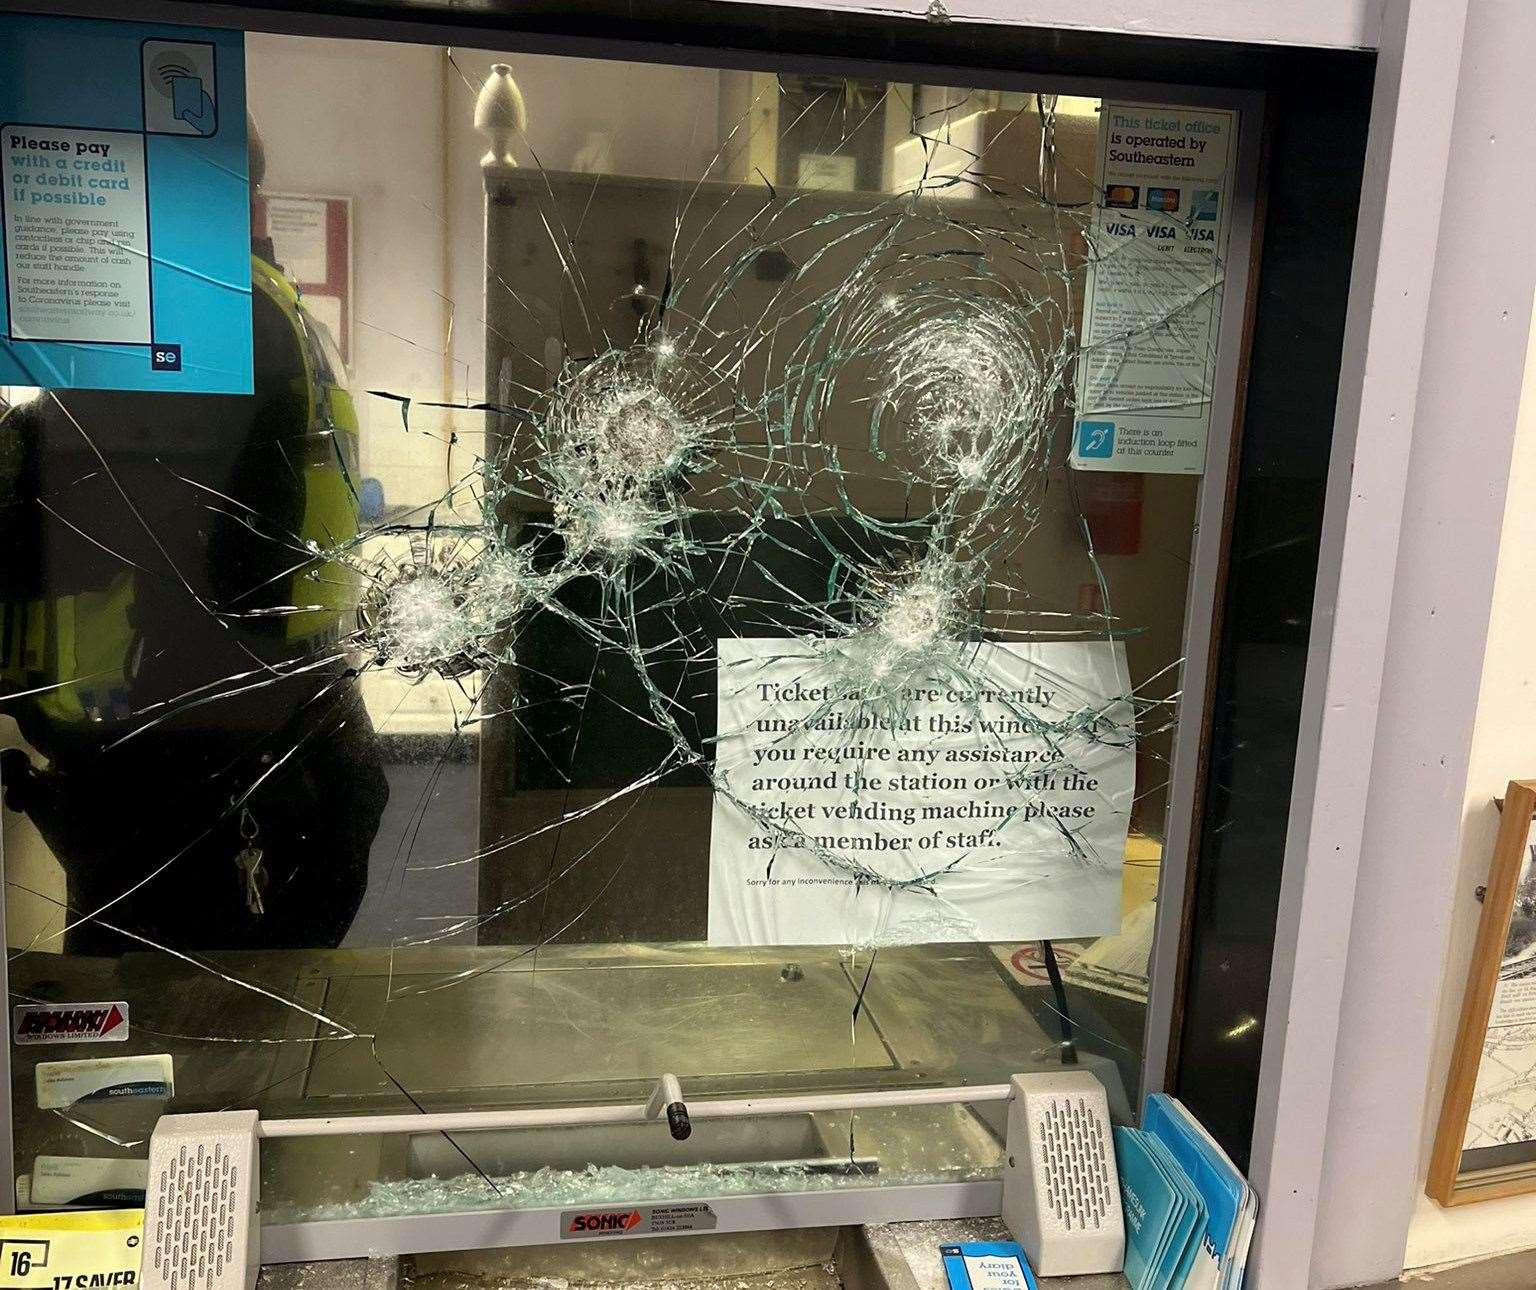 The ticket office window was smashed during the incident. Picture: BTP